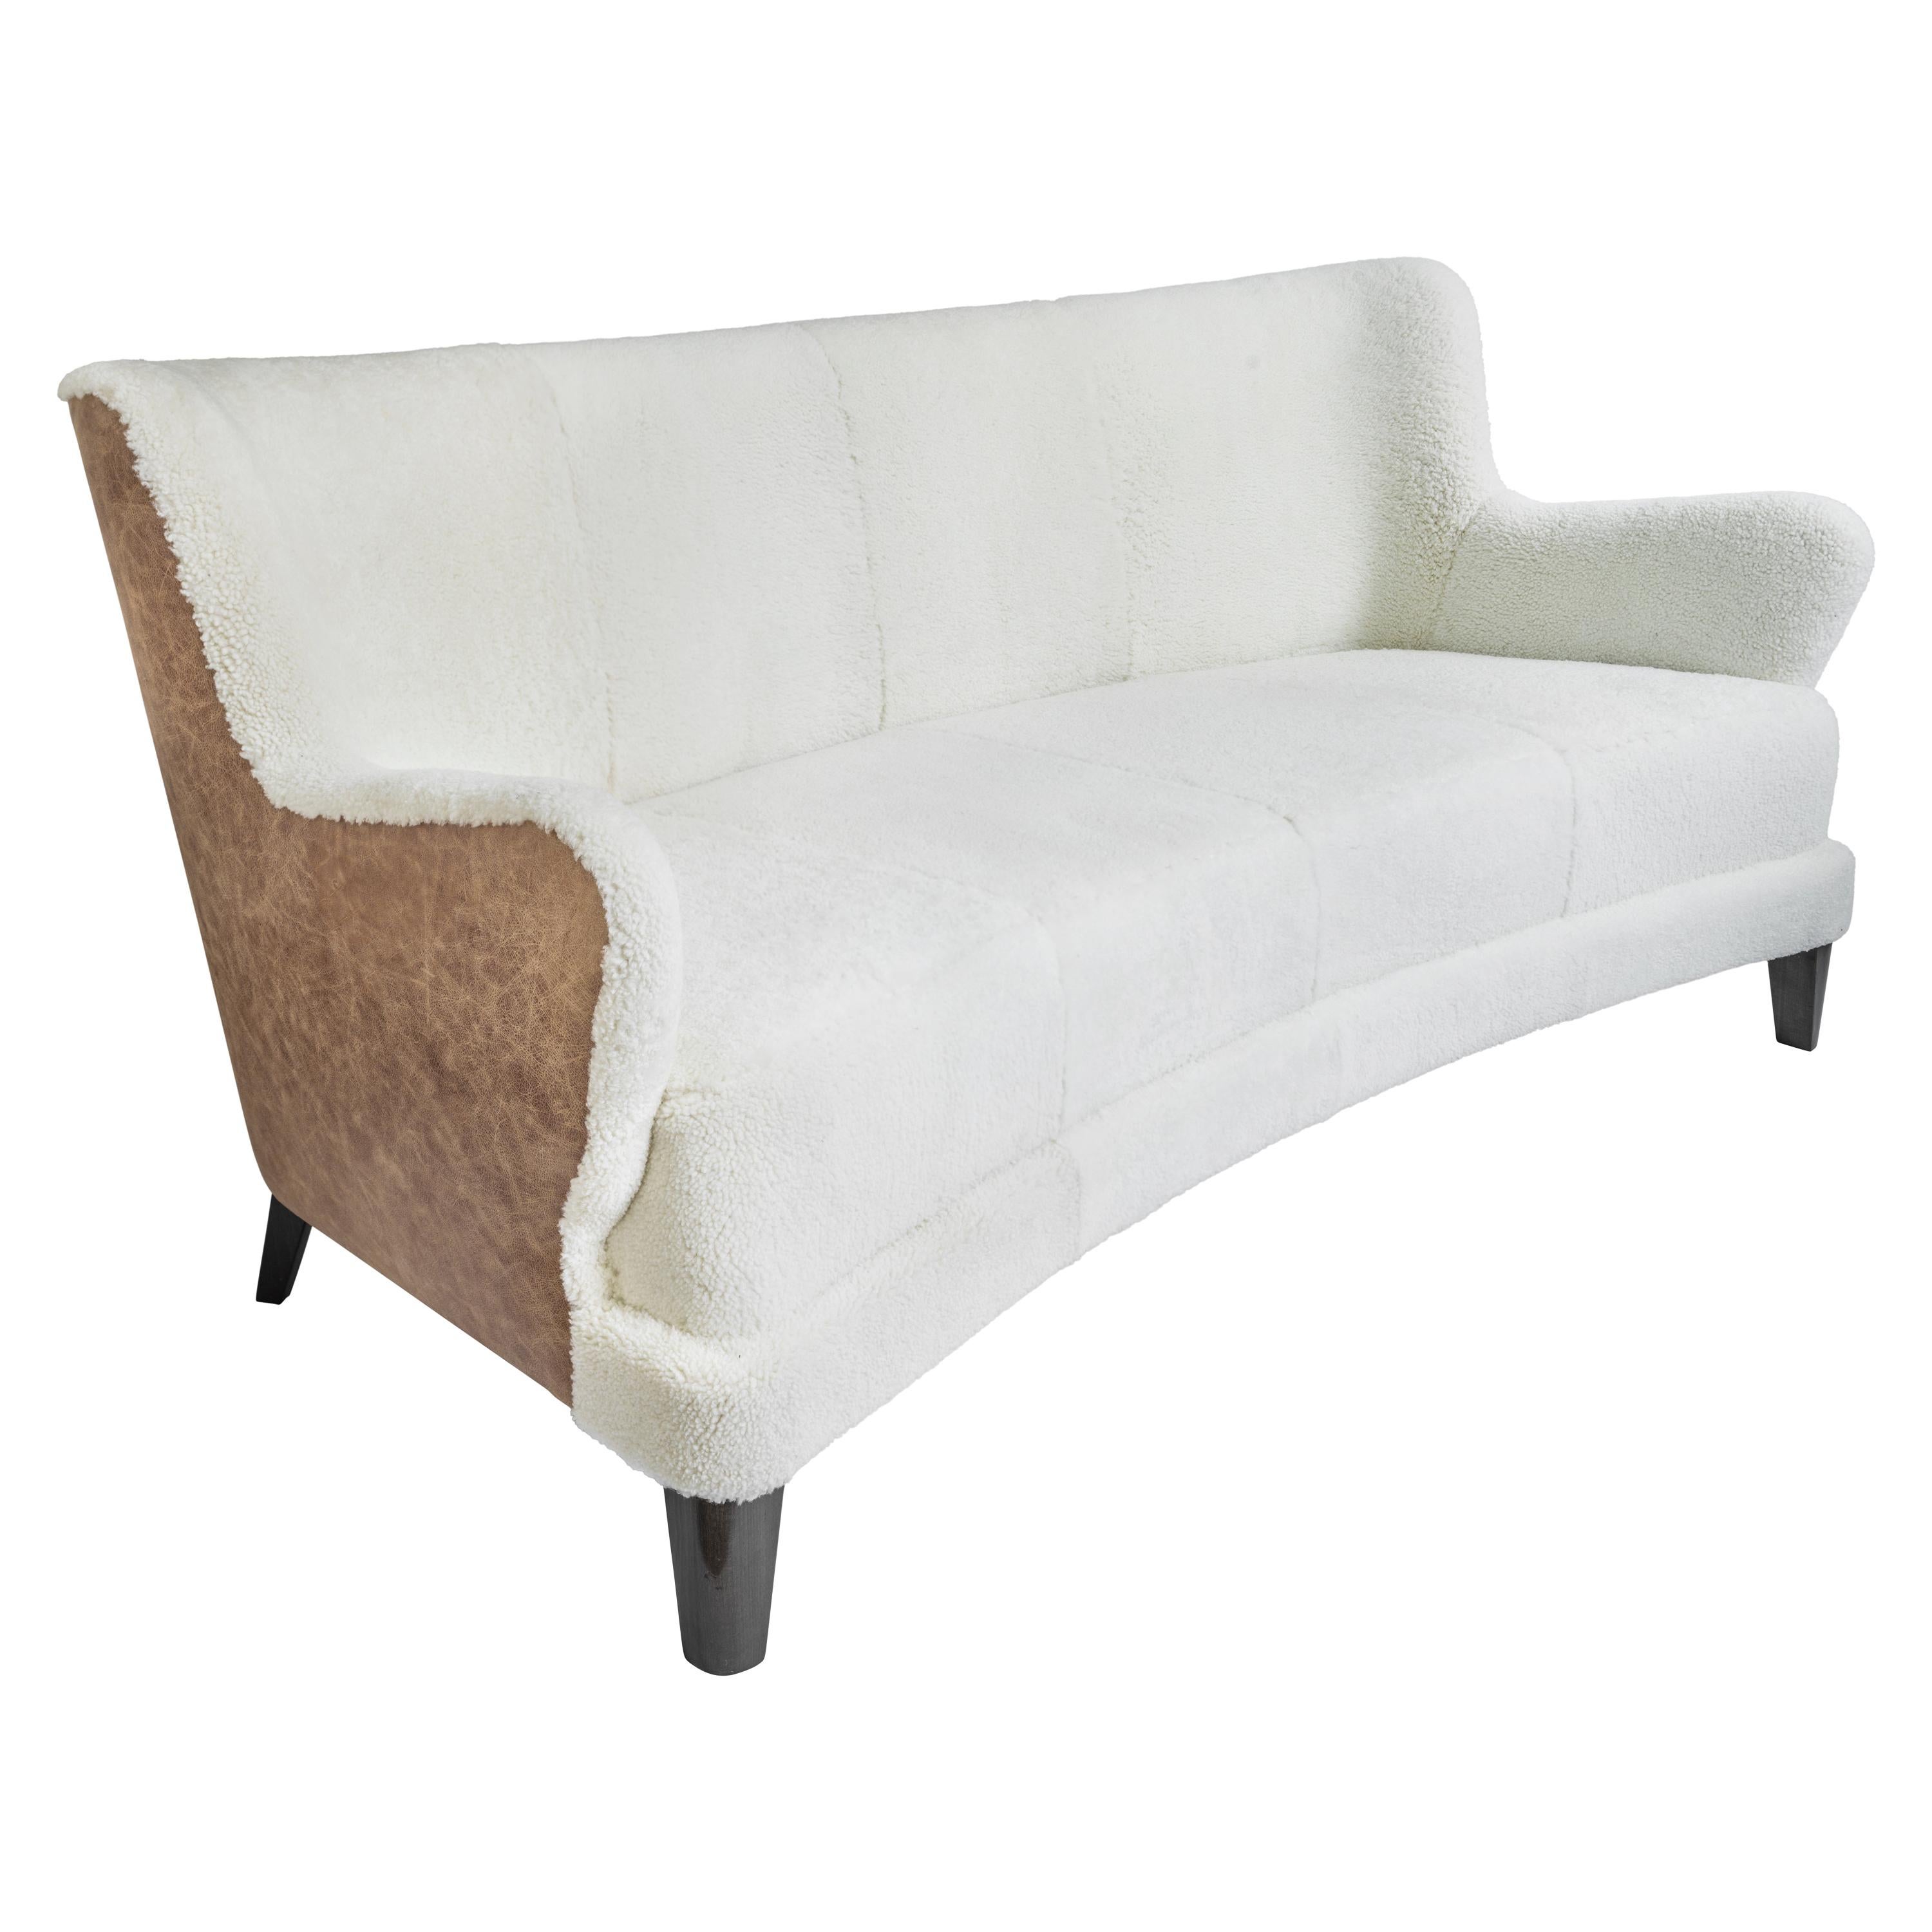 Contemporary Eclipse Curved Sofa in White Sheepskin and Leather Upholstery